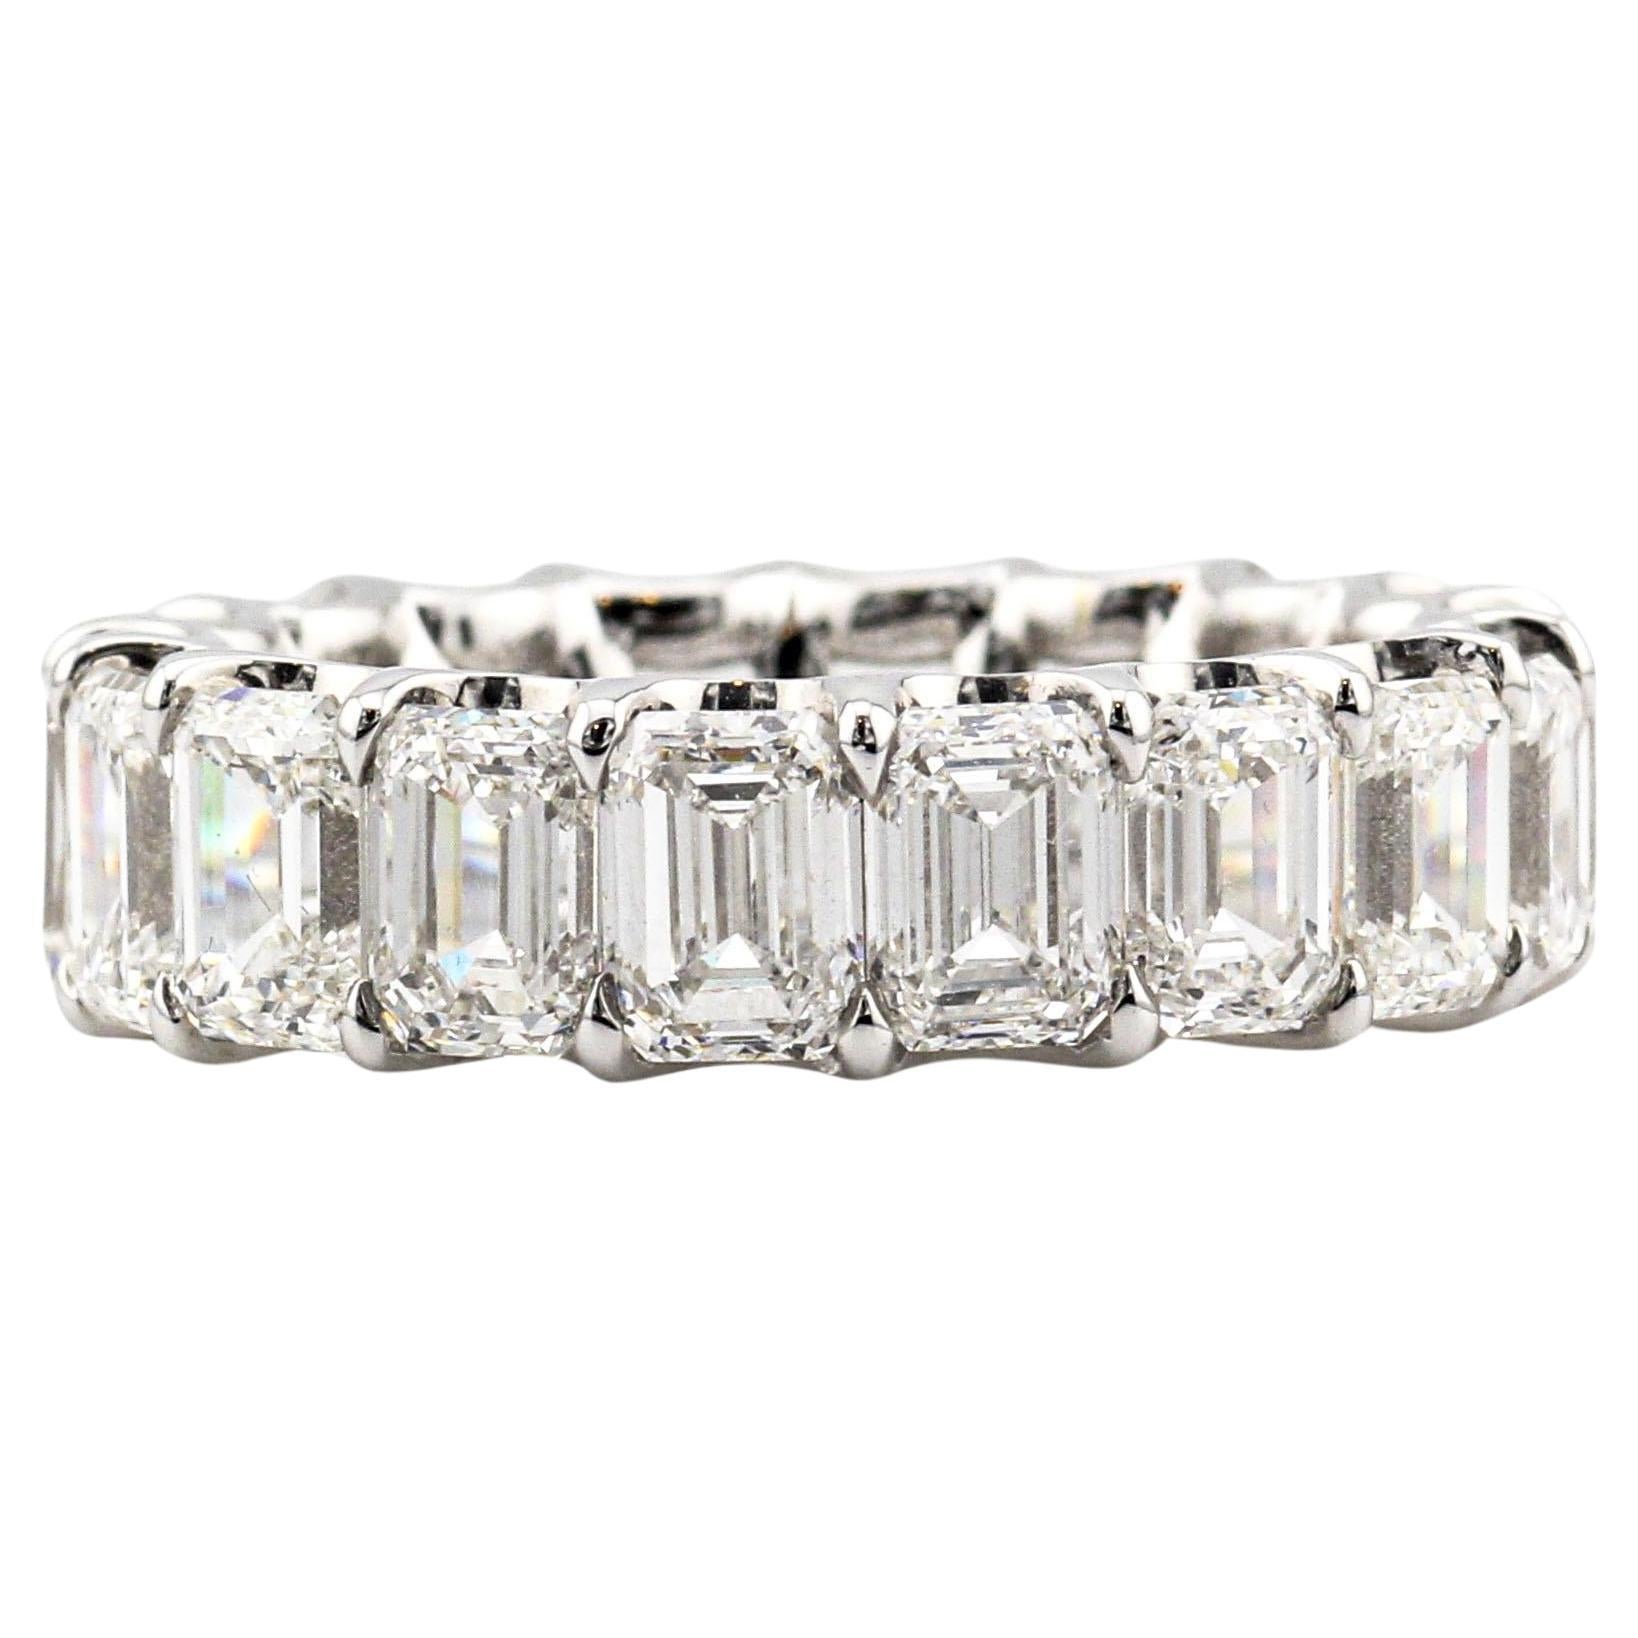 Exceptional GIA D-F IF-VVS2 9.01 cts Emerald Cut Diamond 18k White Gold Band 6.5 For Sale